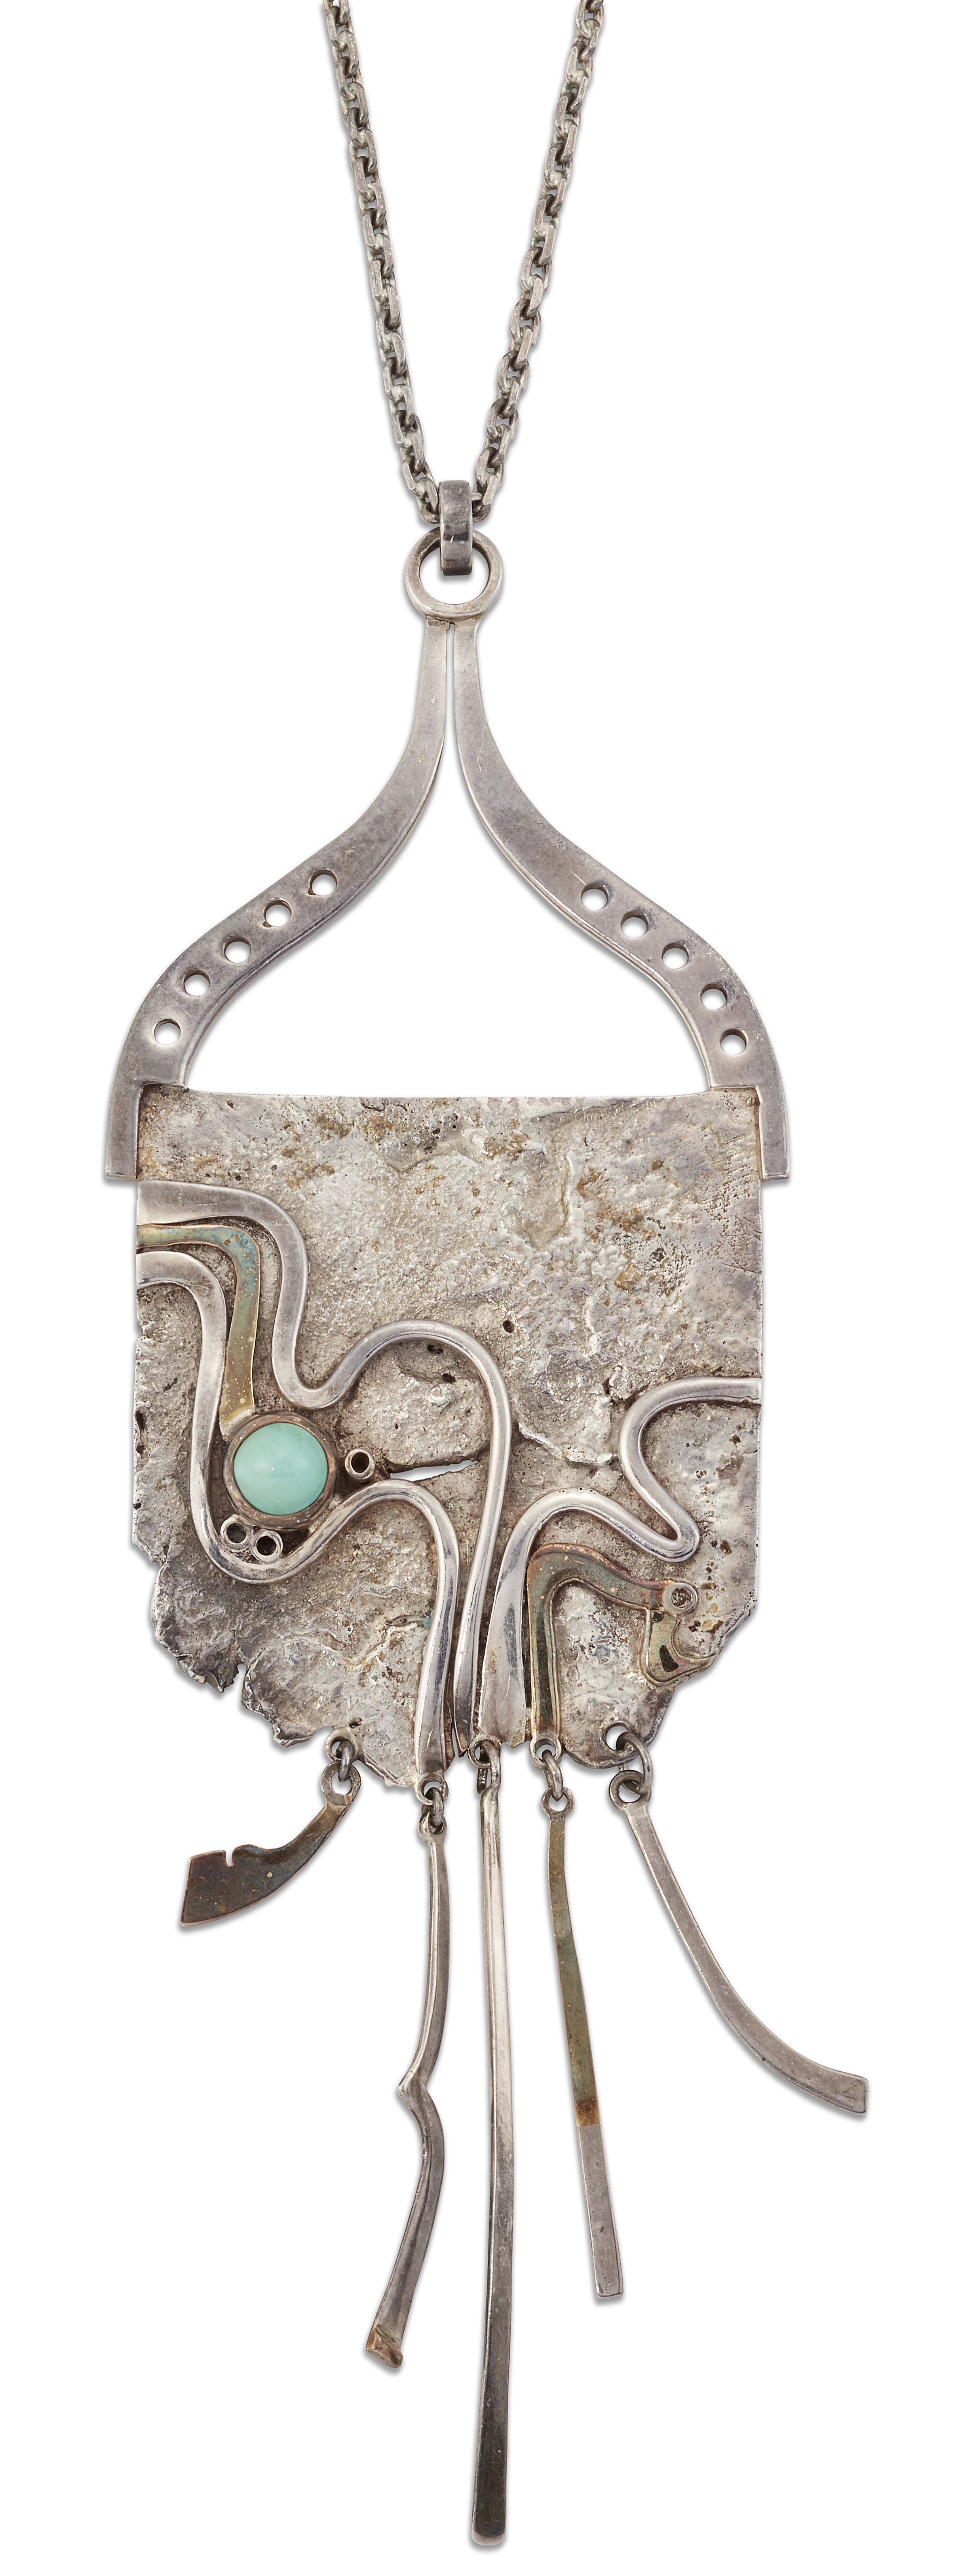 A MODERNIST SILVER PENDANT ON CHAIN